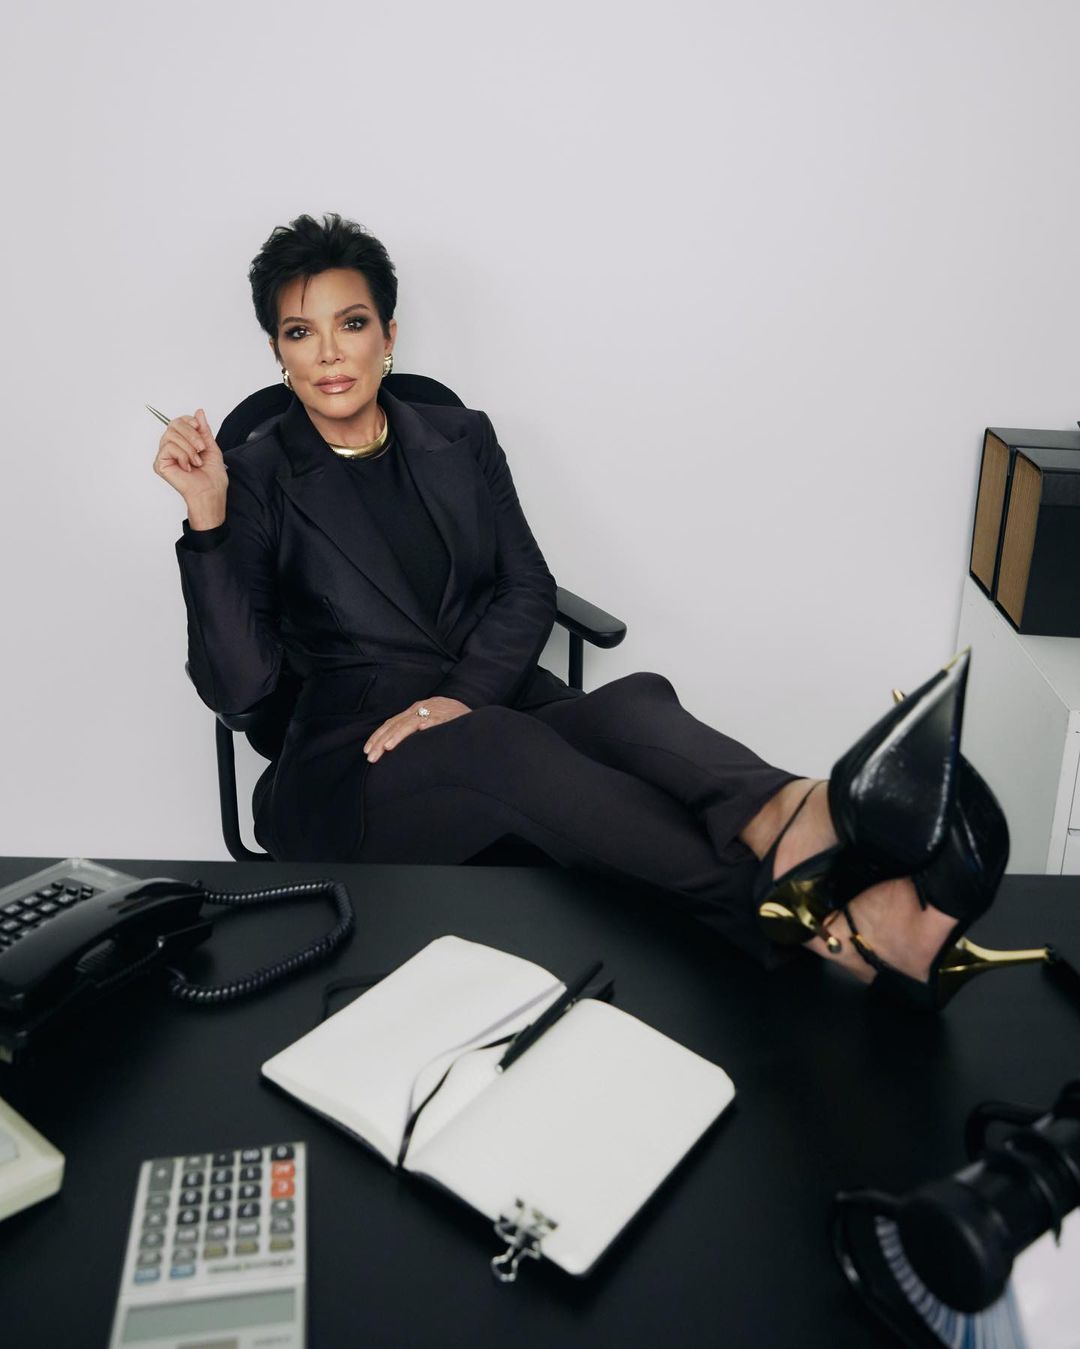 Kris Jenner wears GOOD AMERICAN Black Bossy Outfit During Photoshoot, Feb 2023